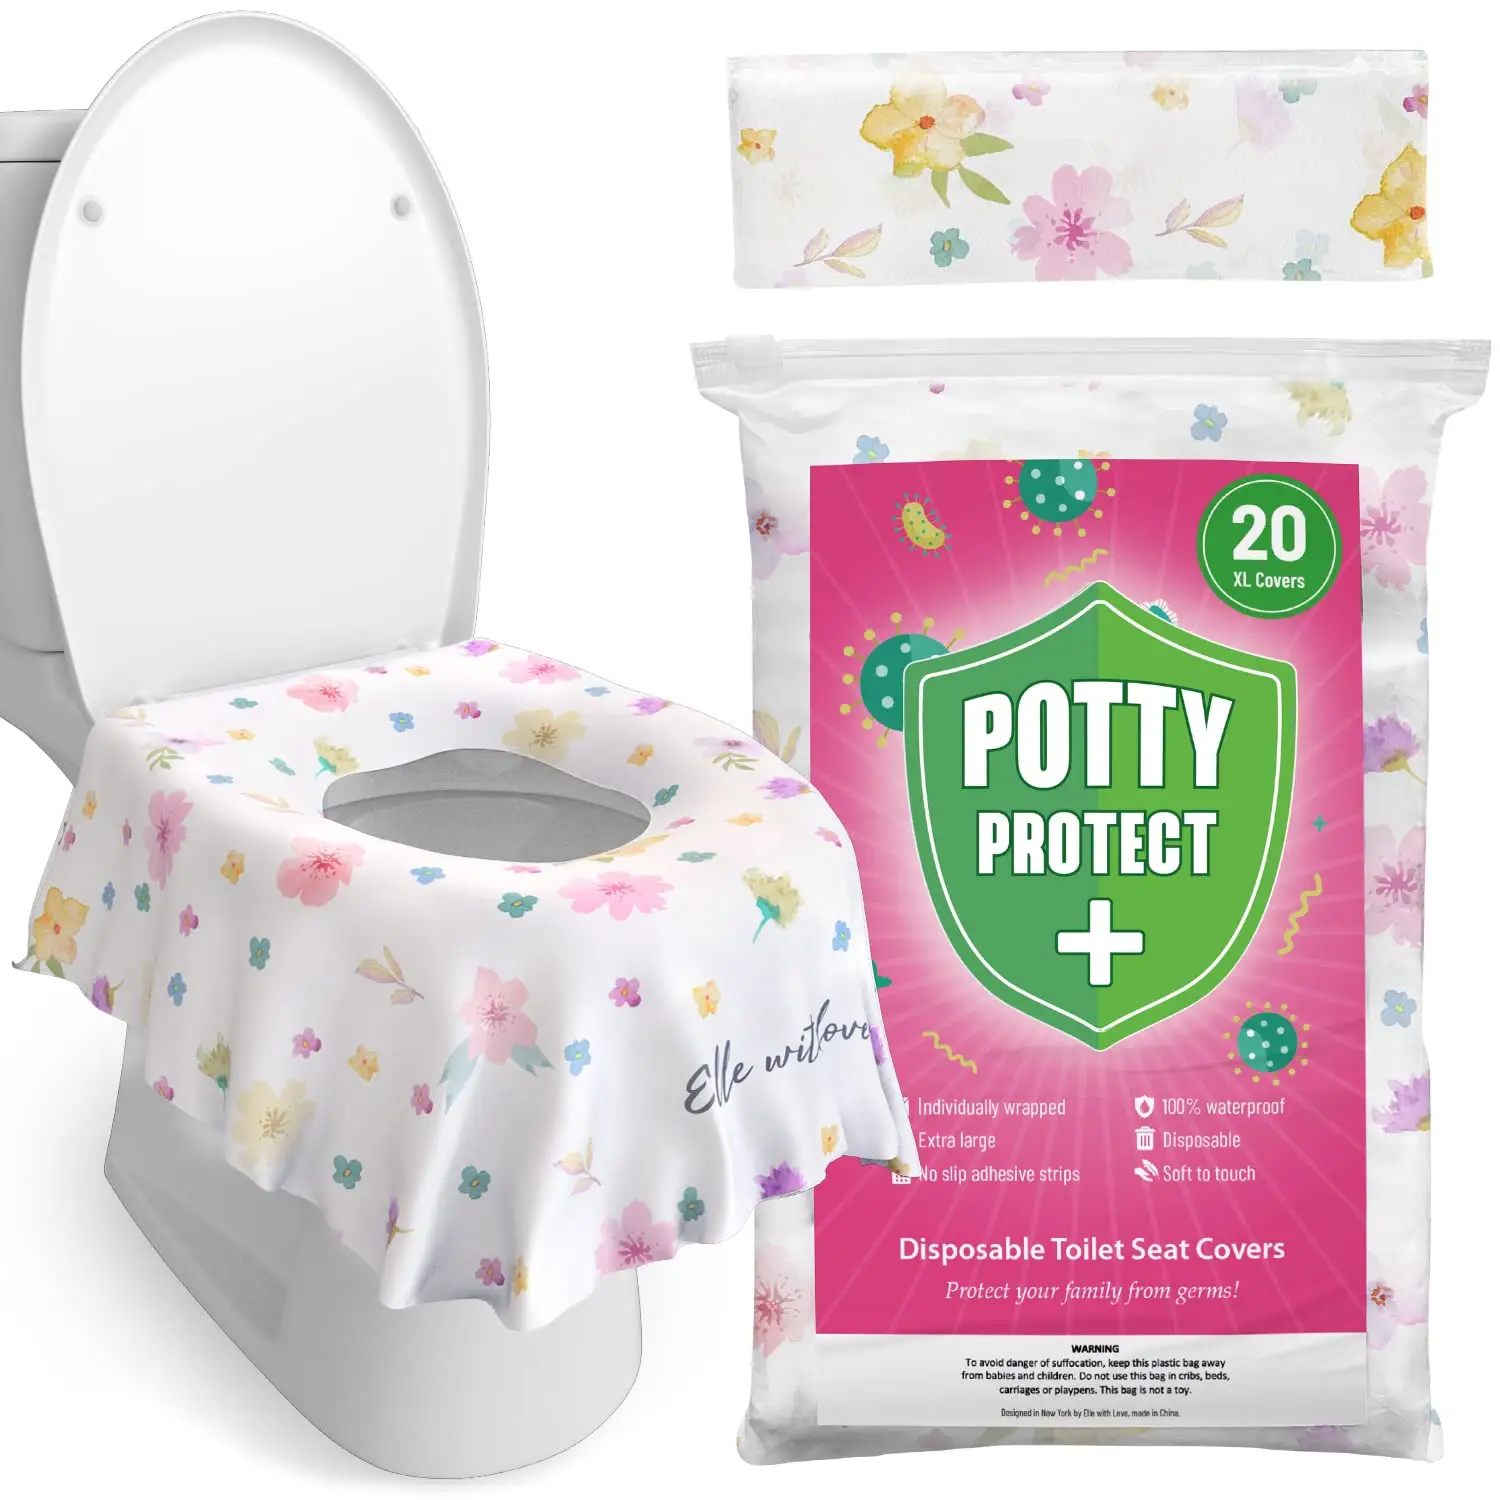 Full Cover Disposable Travel Toilet Potty Seat Covers - Individually Wrapped Portable Potty Shields for Adult